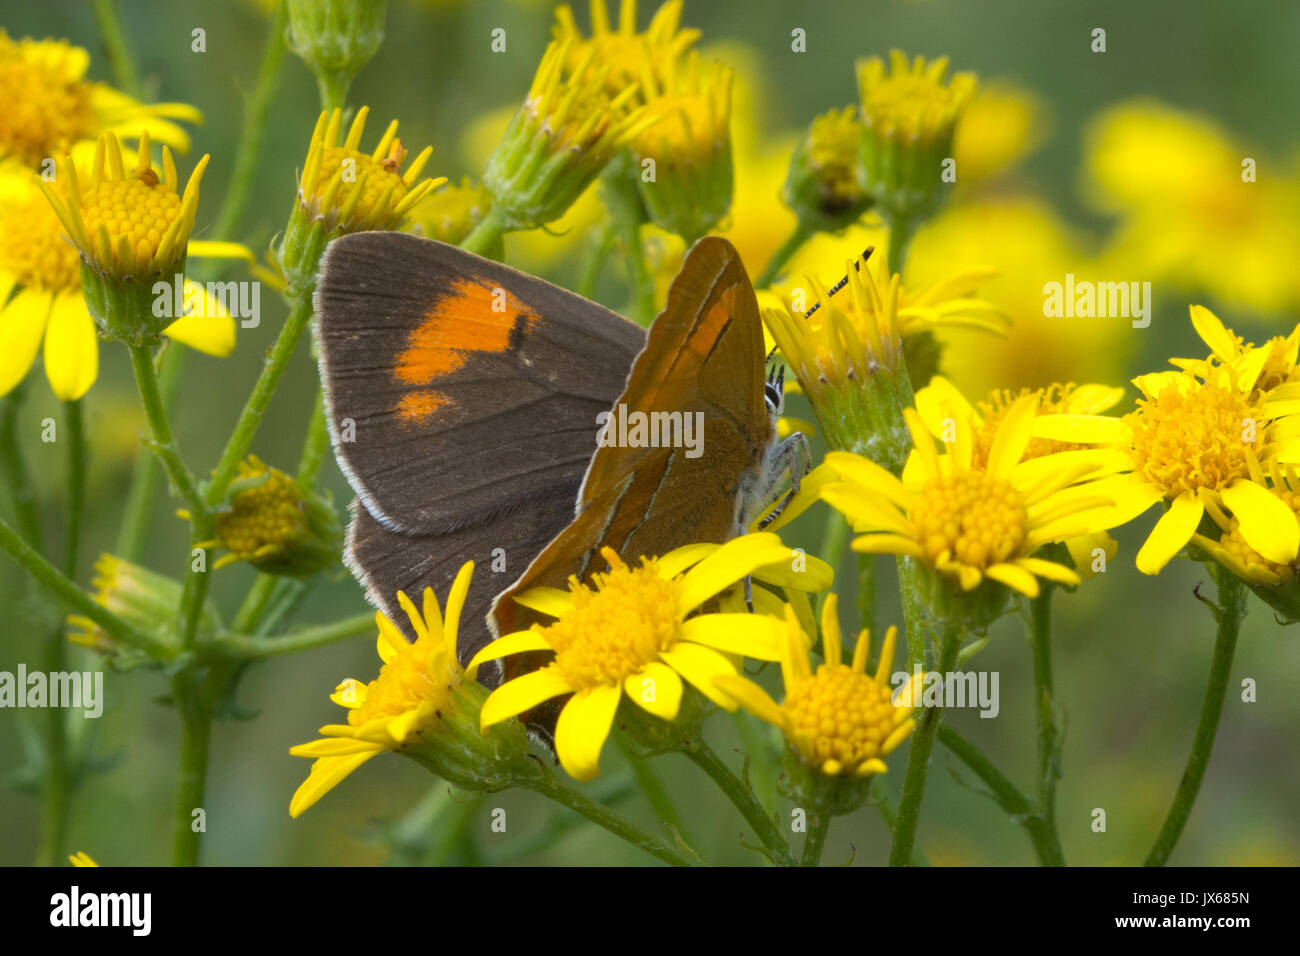 Close-up of female brown hairstreak butterfly (Thecla betulae) on hoary ragwort flowers, UK Stock Photo